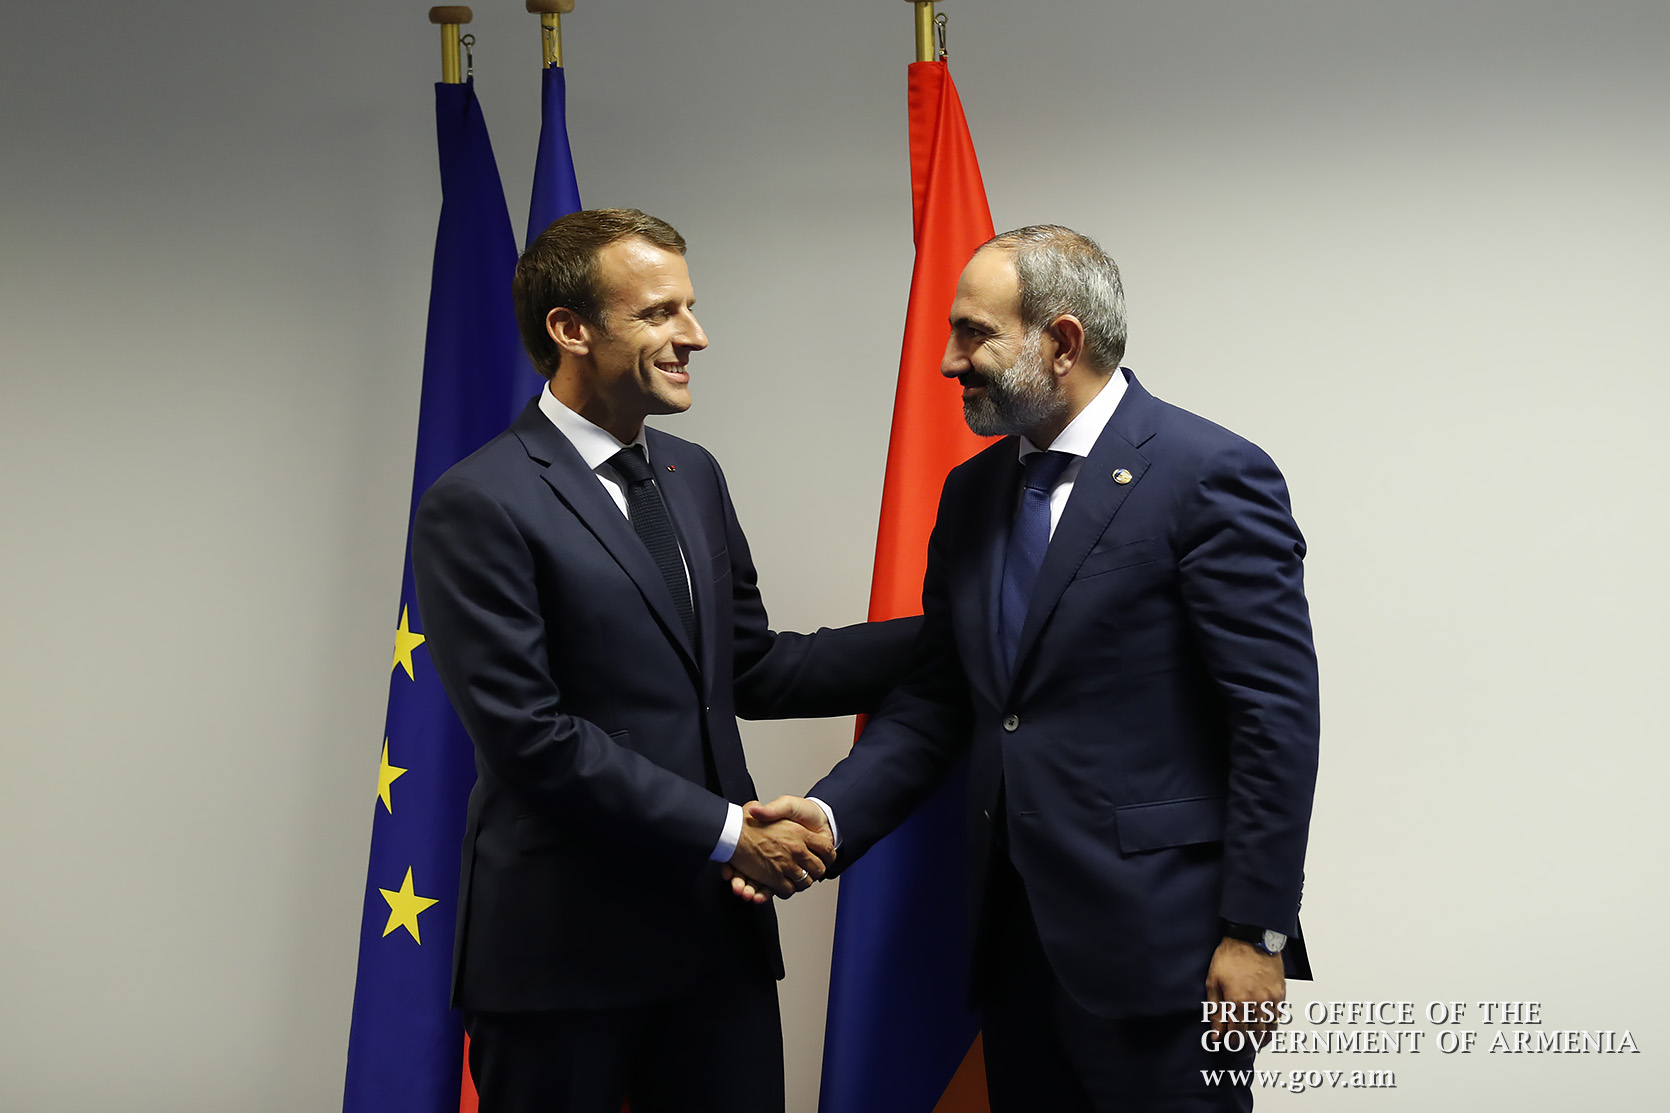 Armenian people can count on full support of France: Macron congratulates Pashinyan on election win